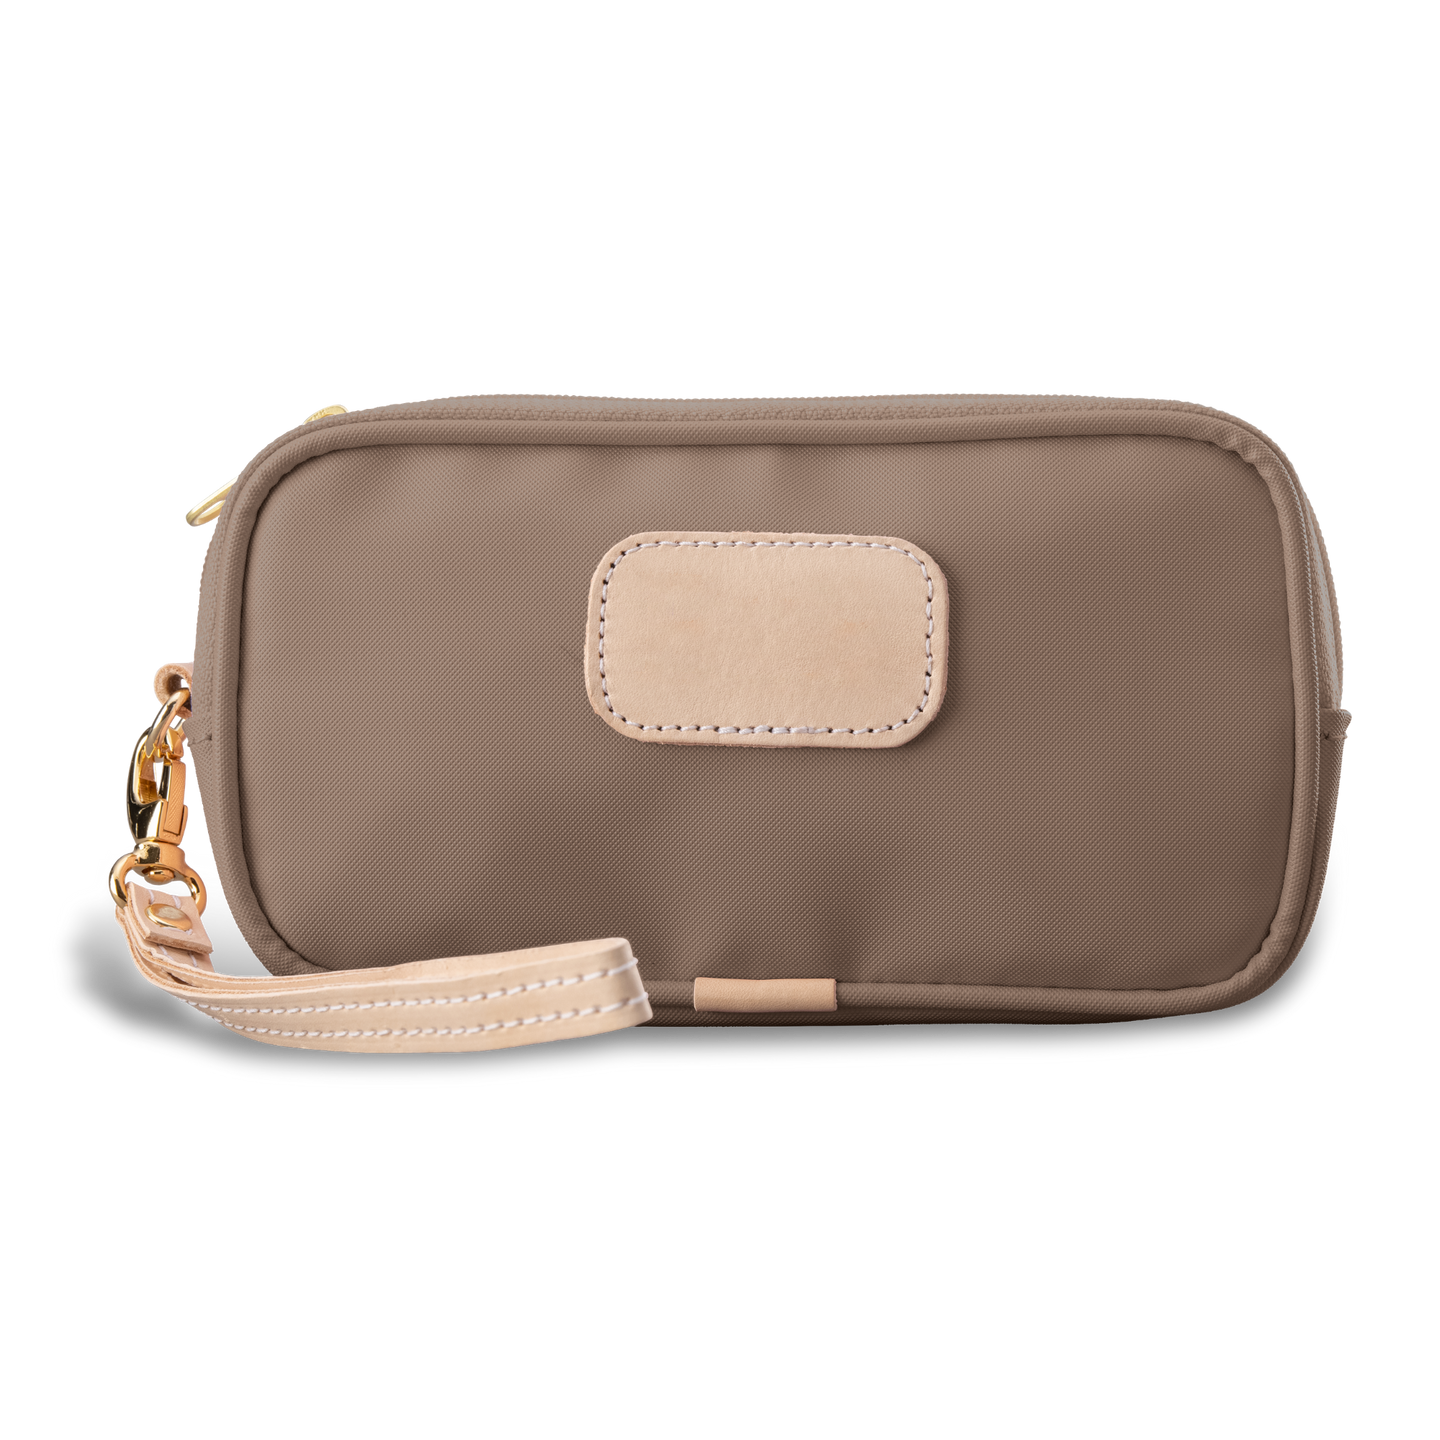 Wristlet - Saddle Coated Canvas Front Angle in Color 'Saddle Coated Canvas'